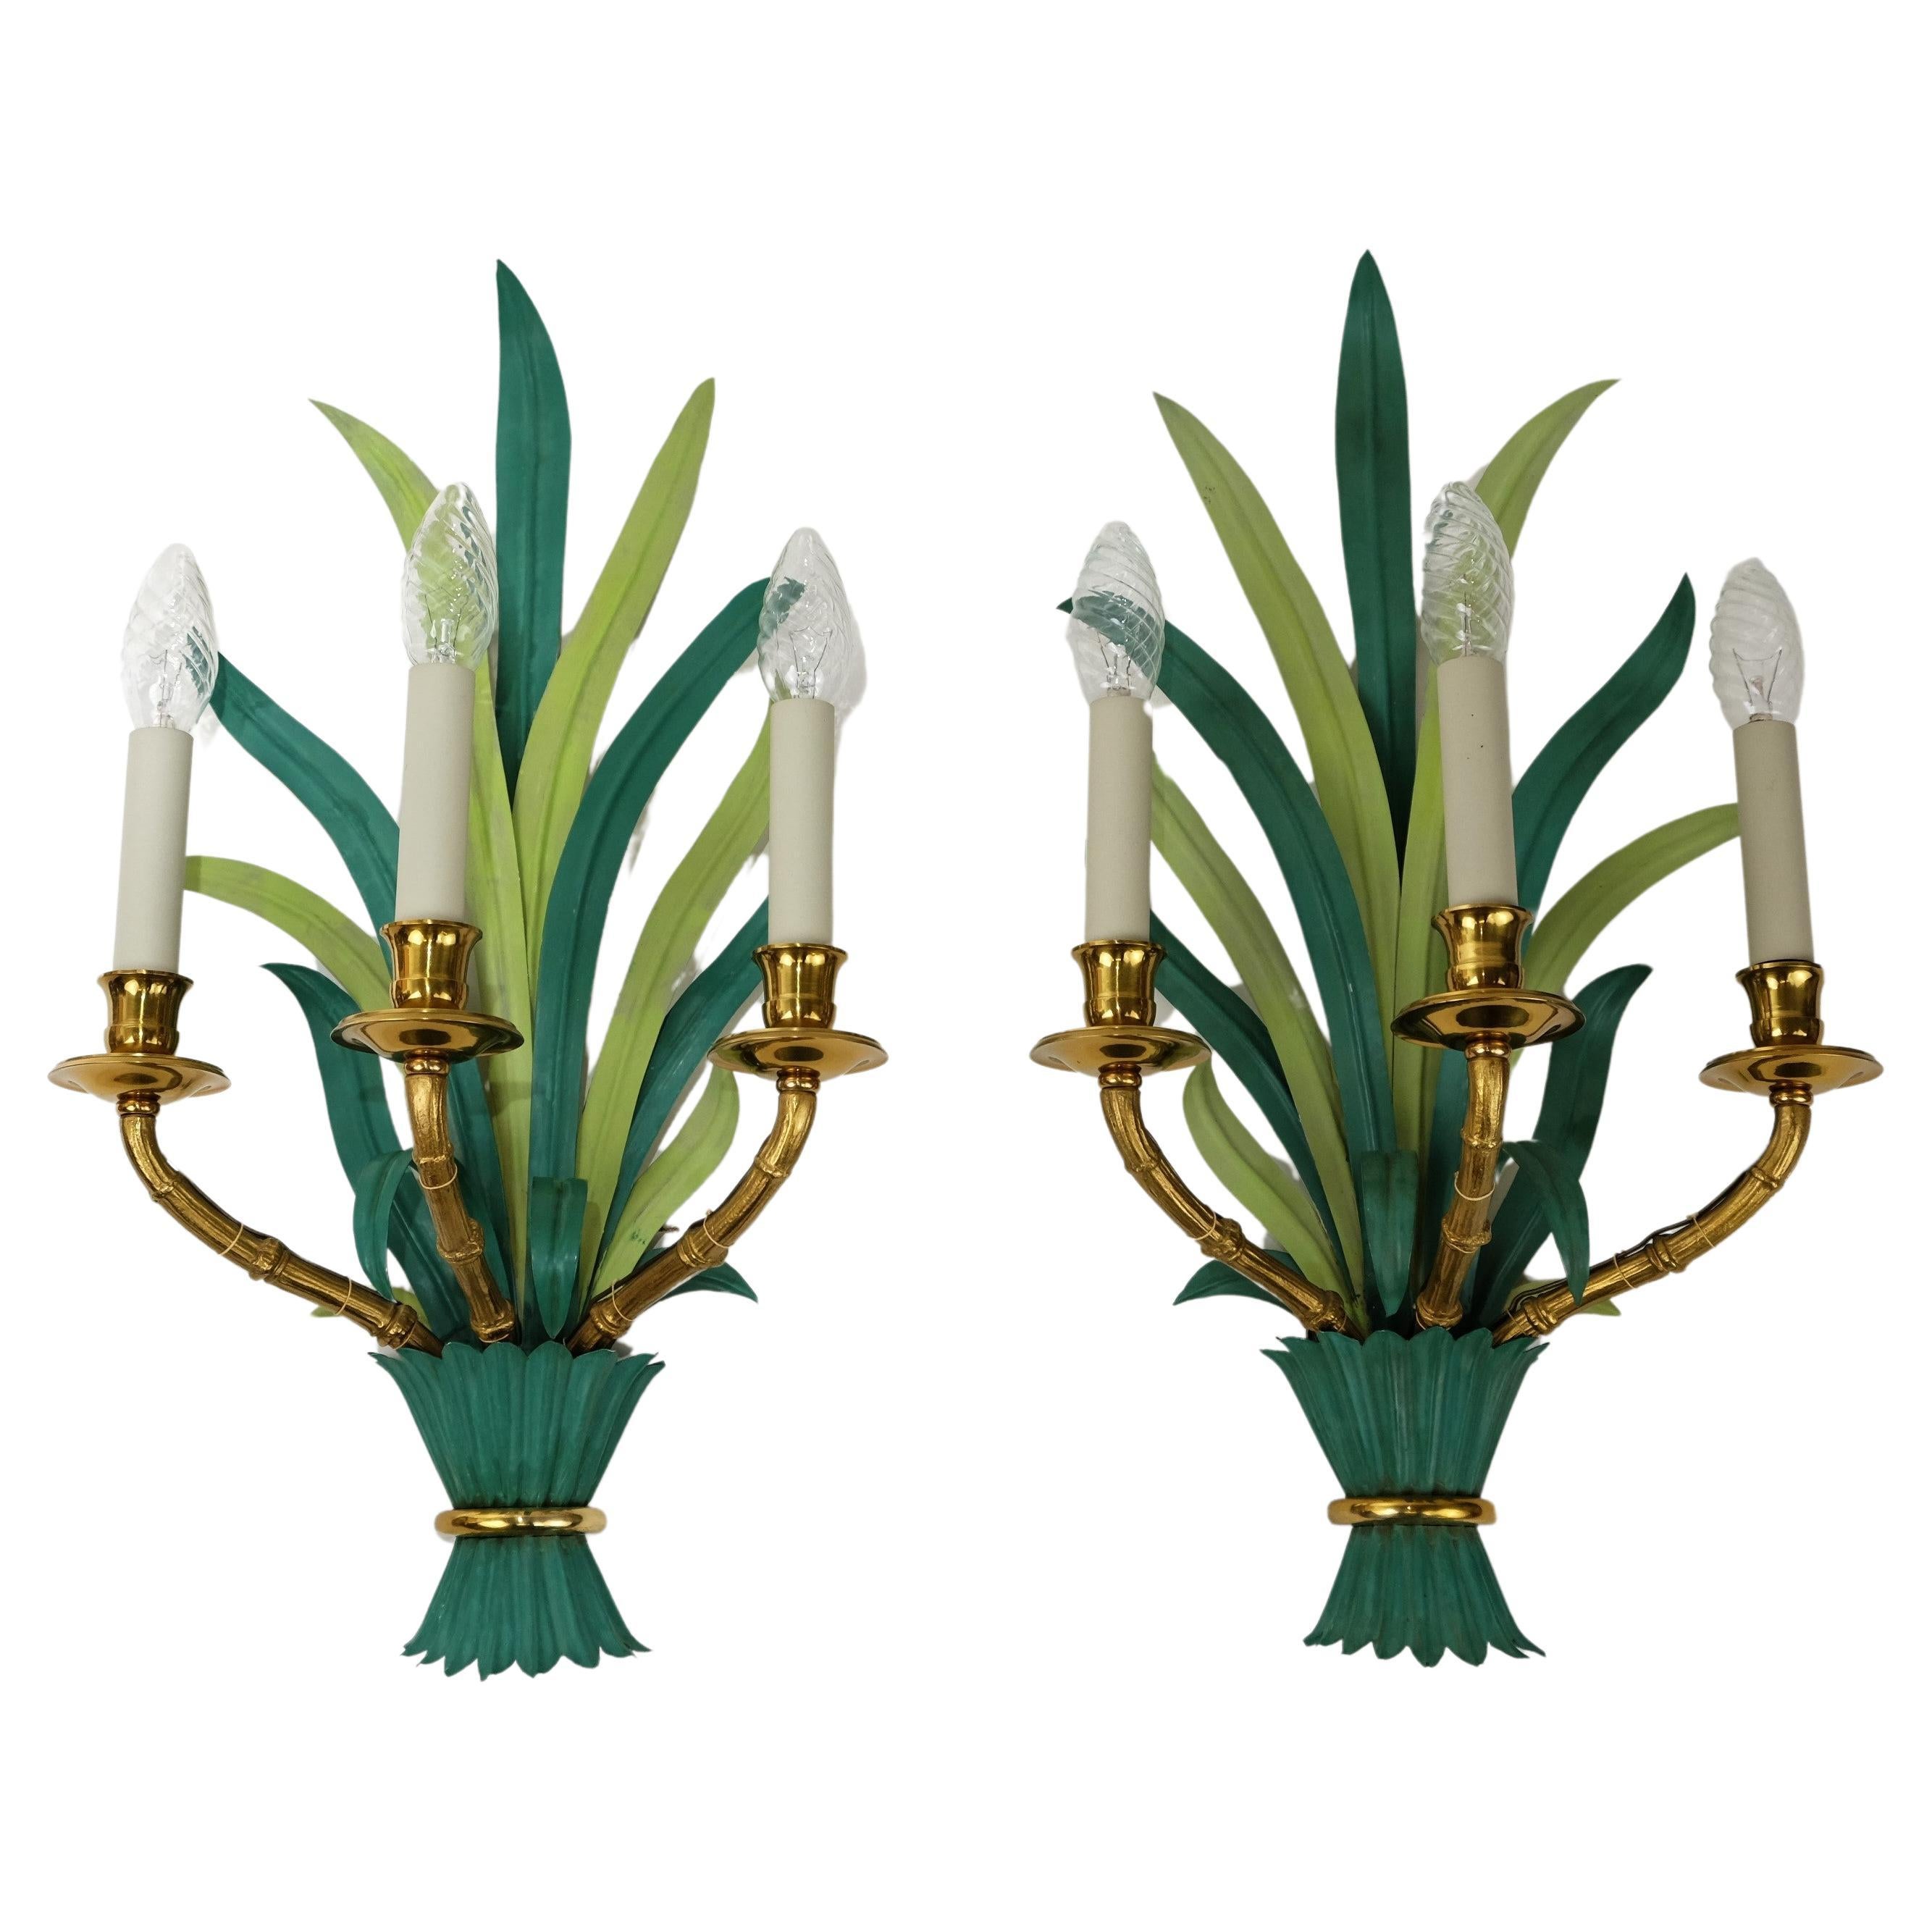 Pair of Wall Lamps / Sconces by Maison Bagues Bamboo Palm Leaves, France 1950s For Sale